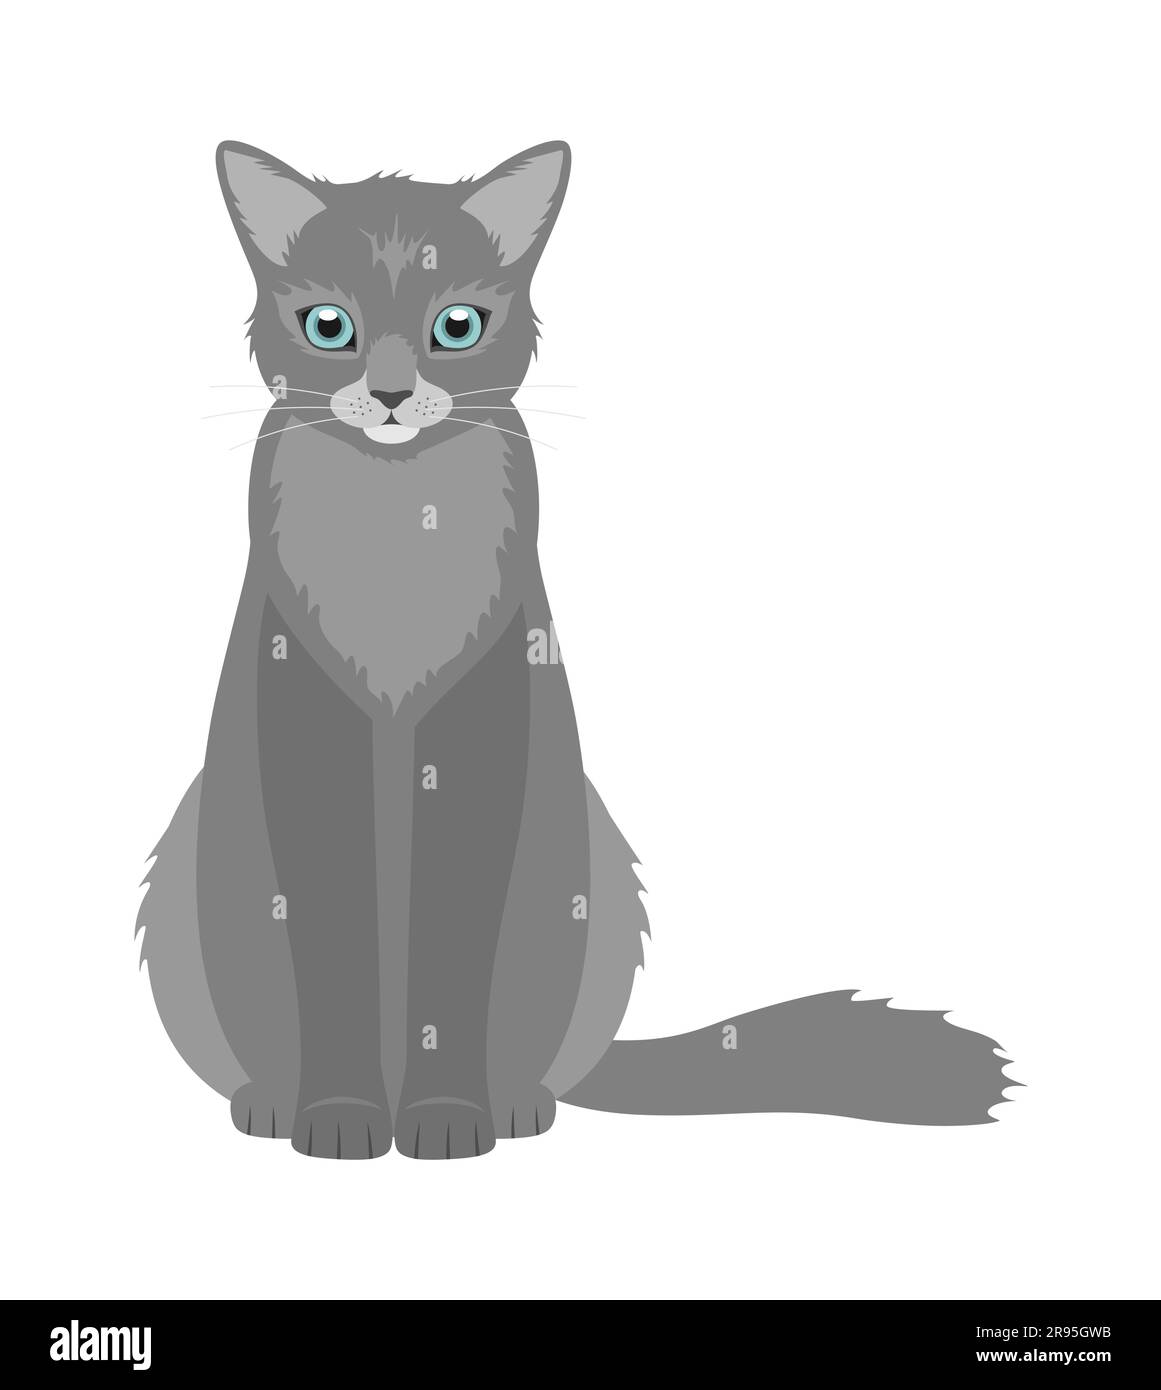 A gray cat with blue eyes sitting isolated on a white background. Flat vector illustration Stock Vector